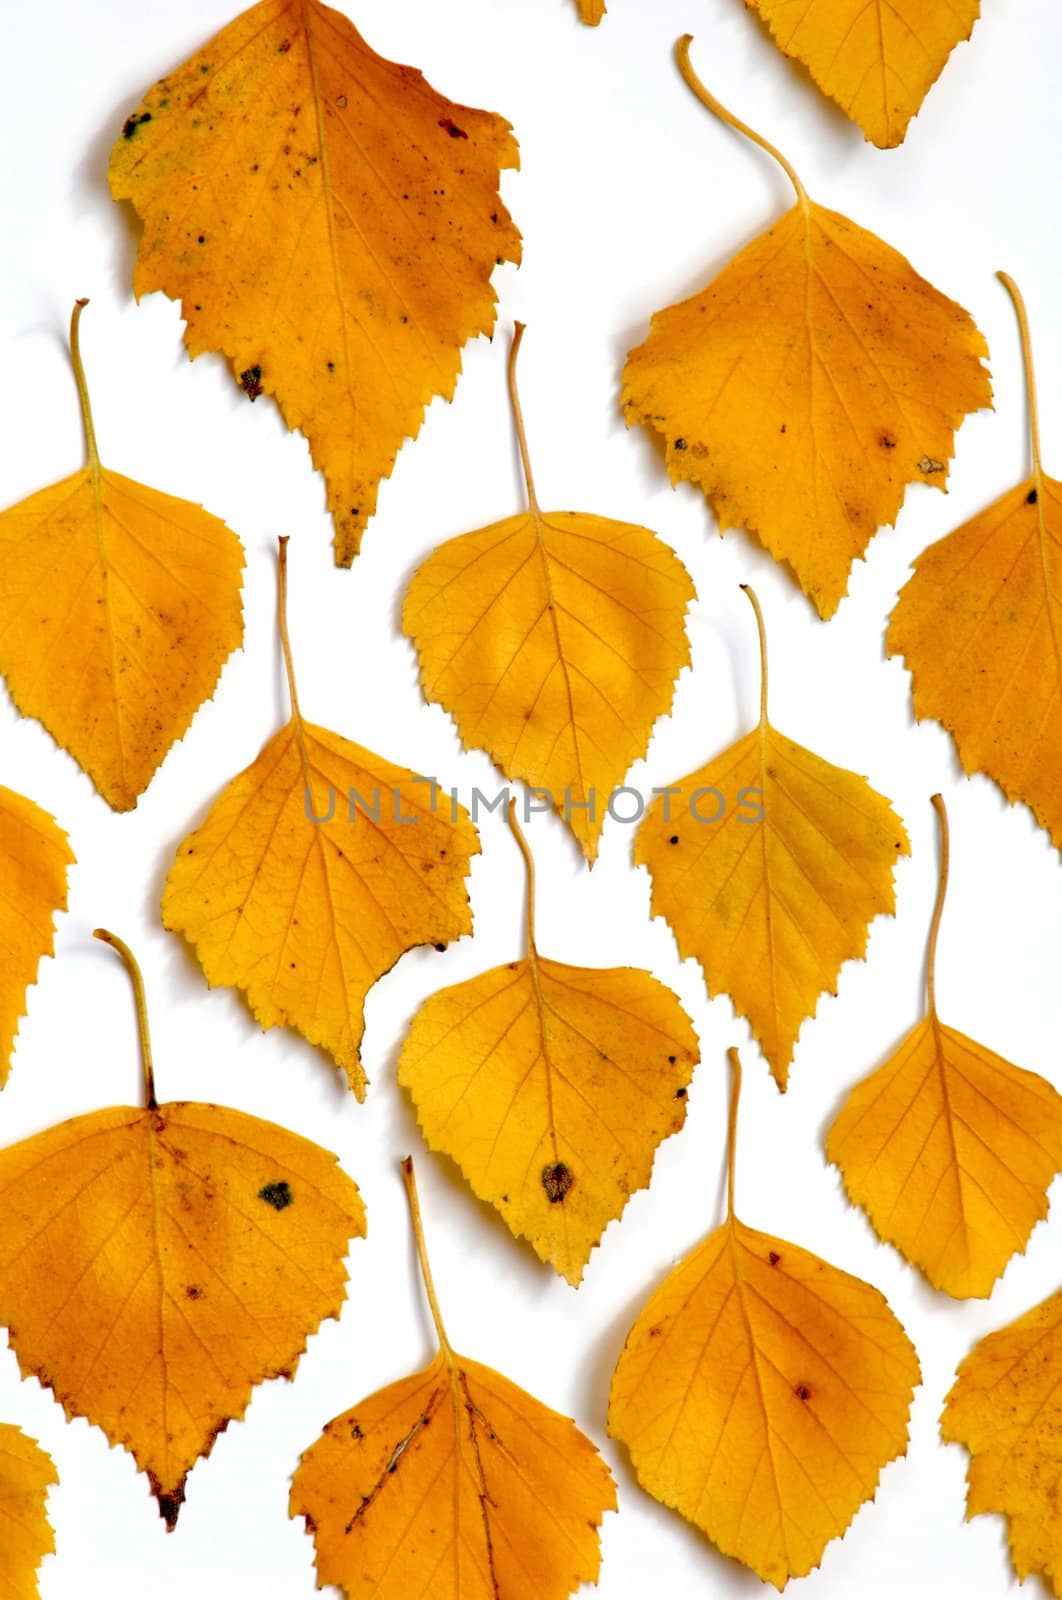 An image of many yellow birch leaves